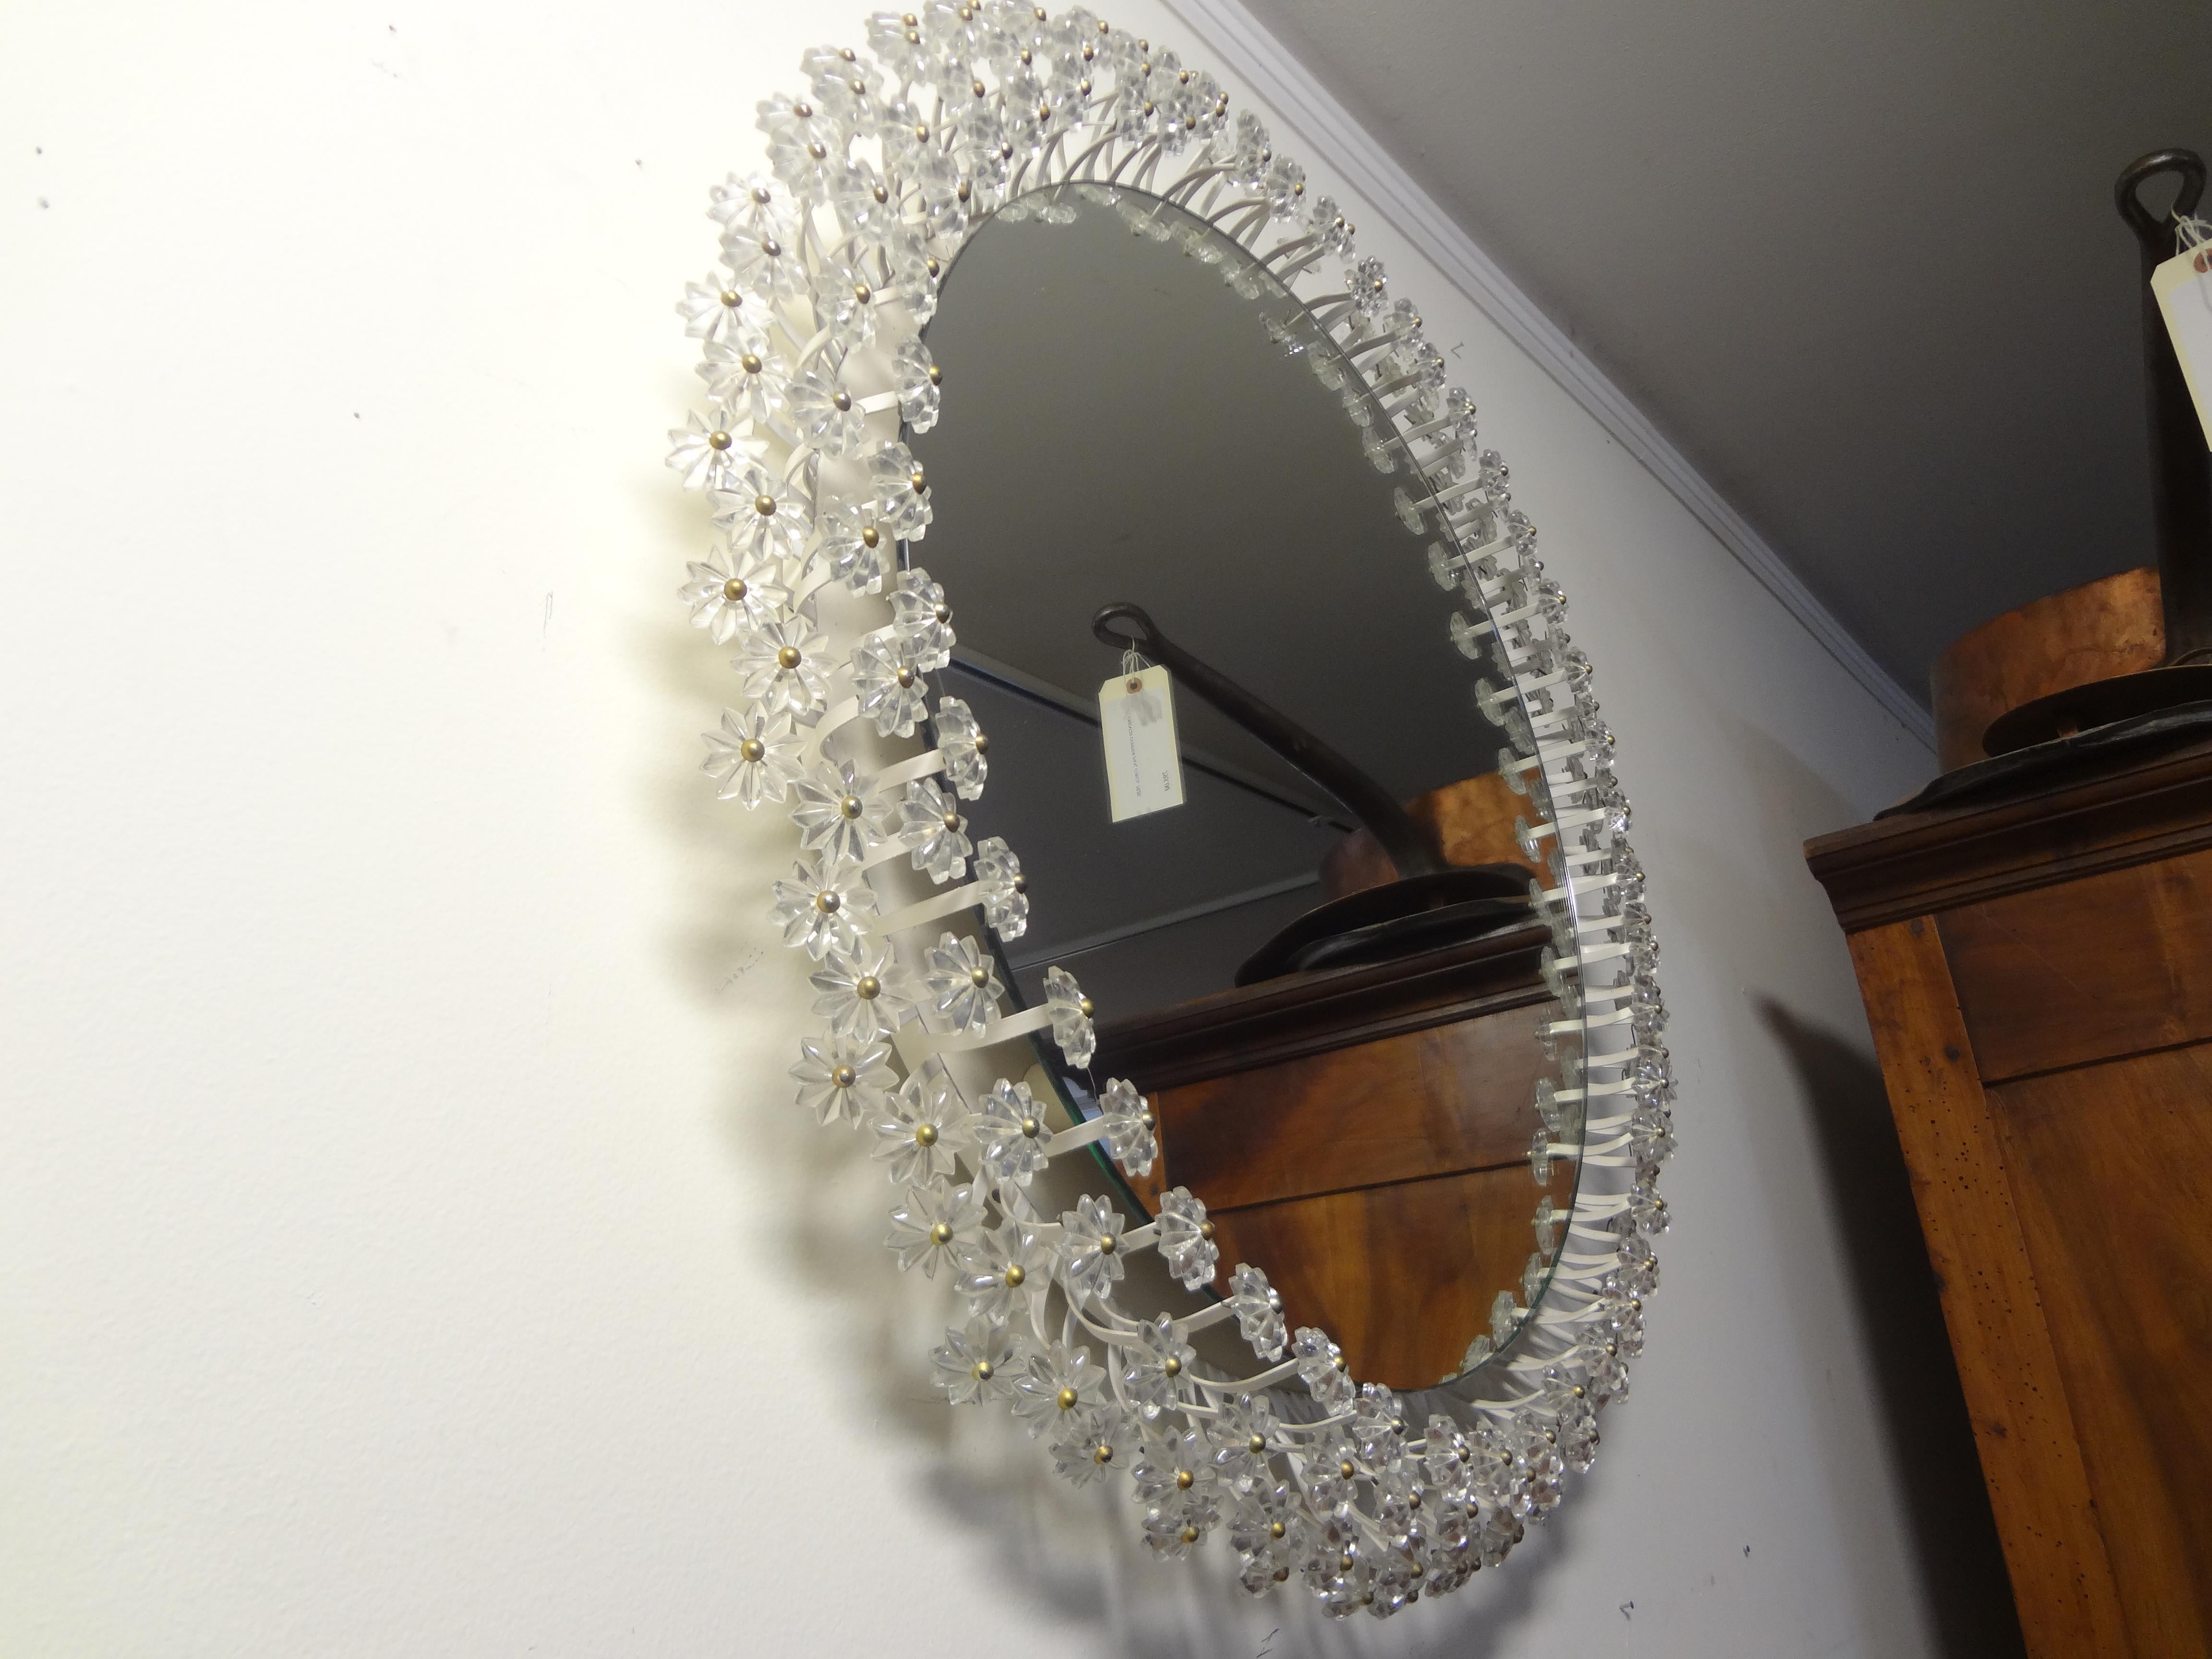 Mid-20th Century Austrian Mirror with Glass Blossoms by Emil Stejnar for Rupert Nikoll